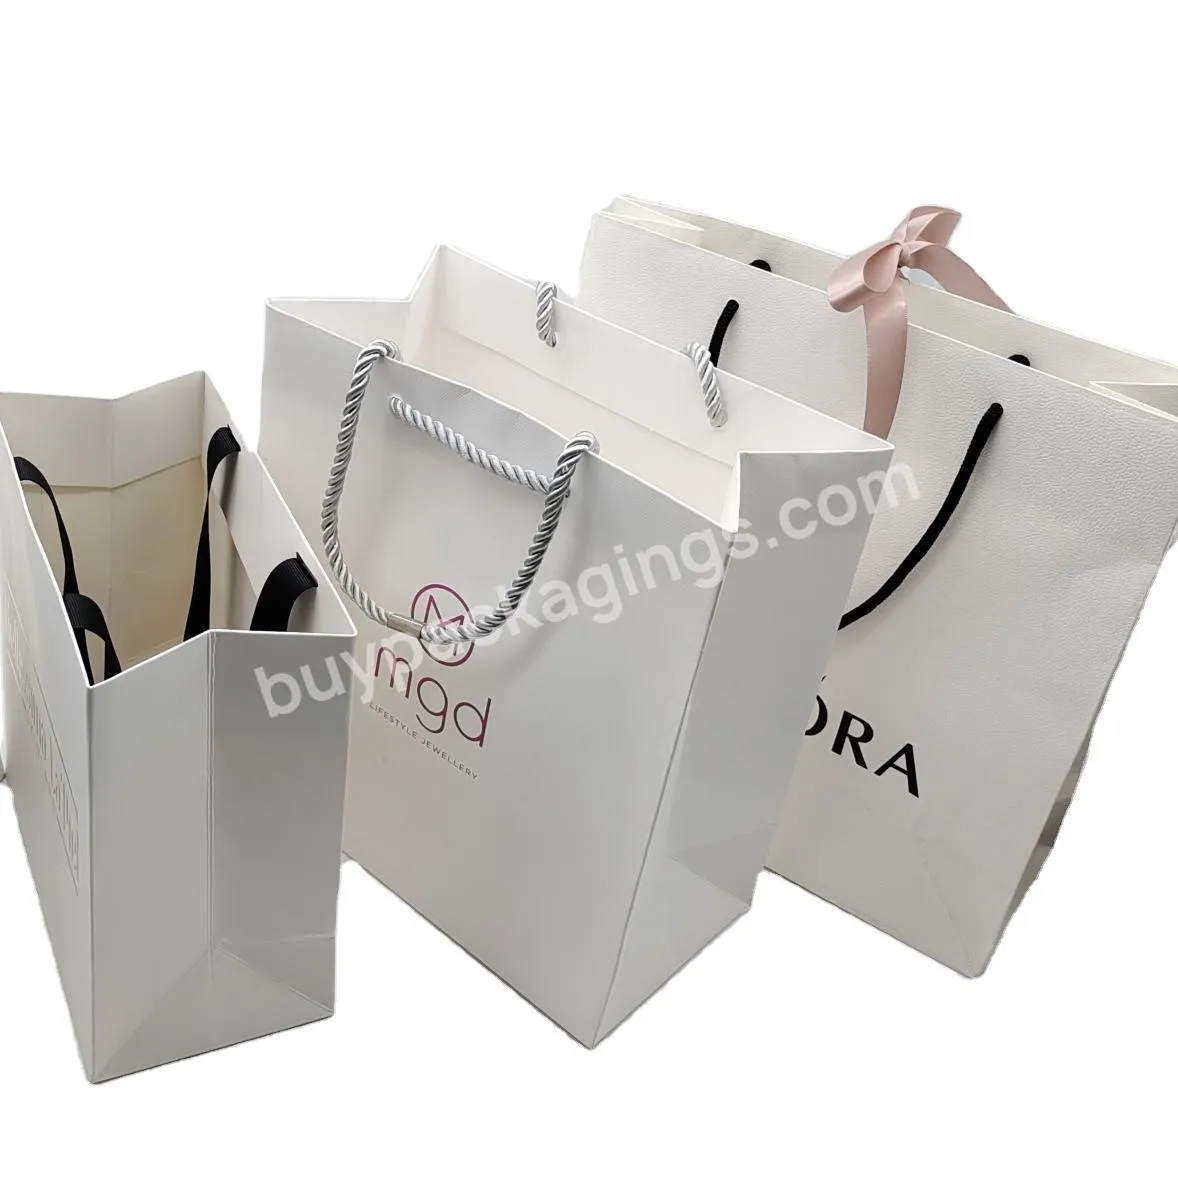 Christmas Exquisite Logo Containing Cardboard Packing Environment Friendly Costume Bags With Handles